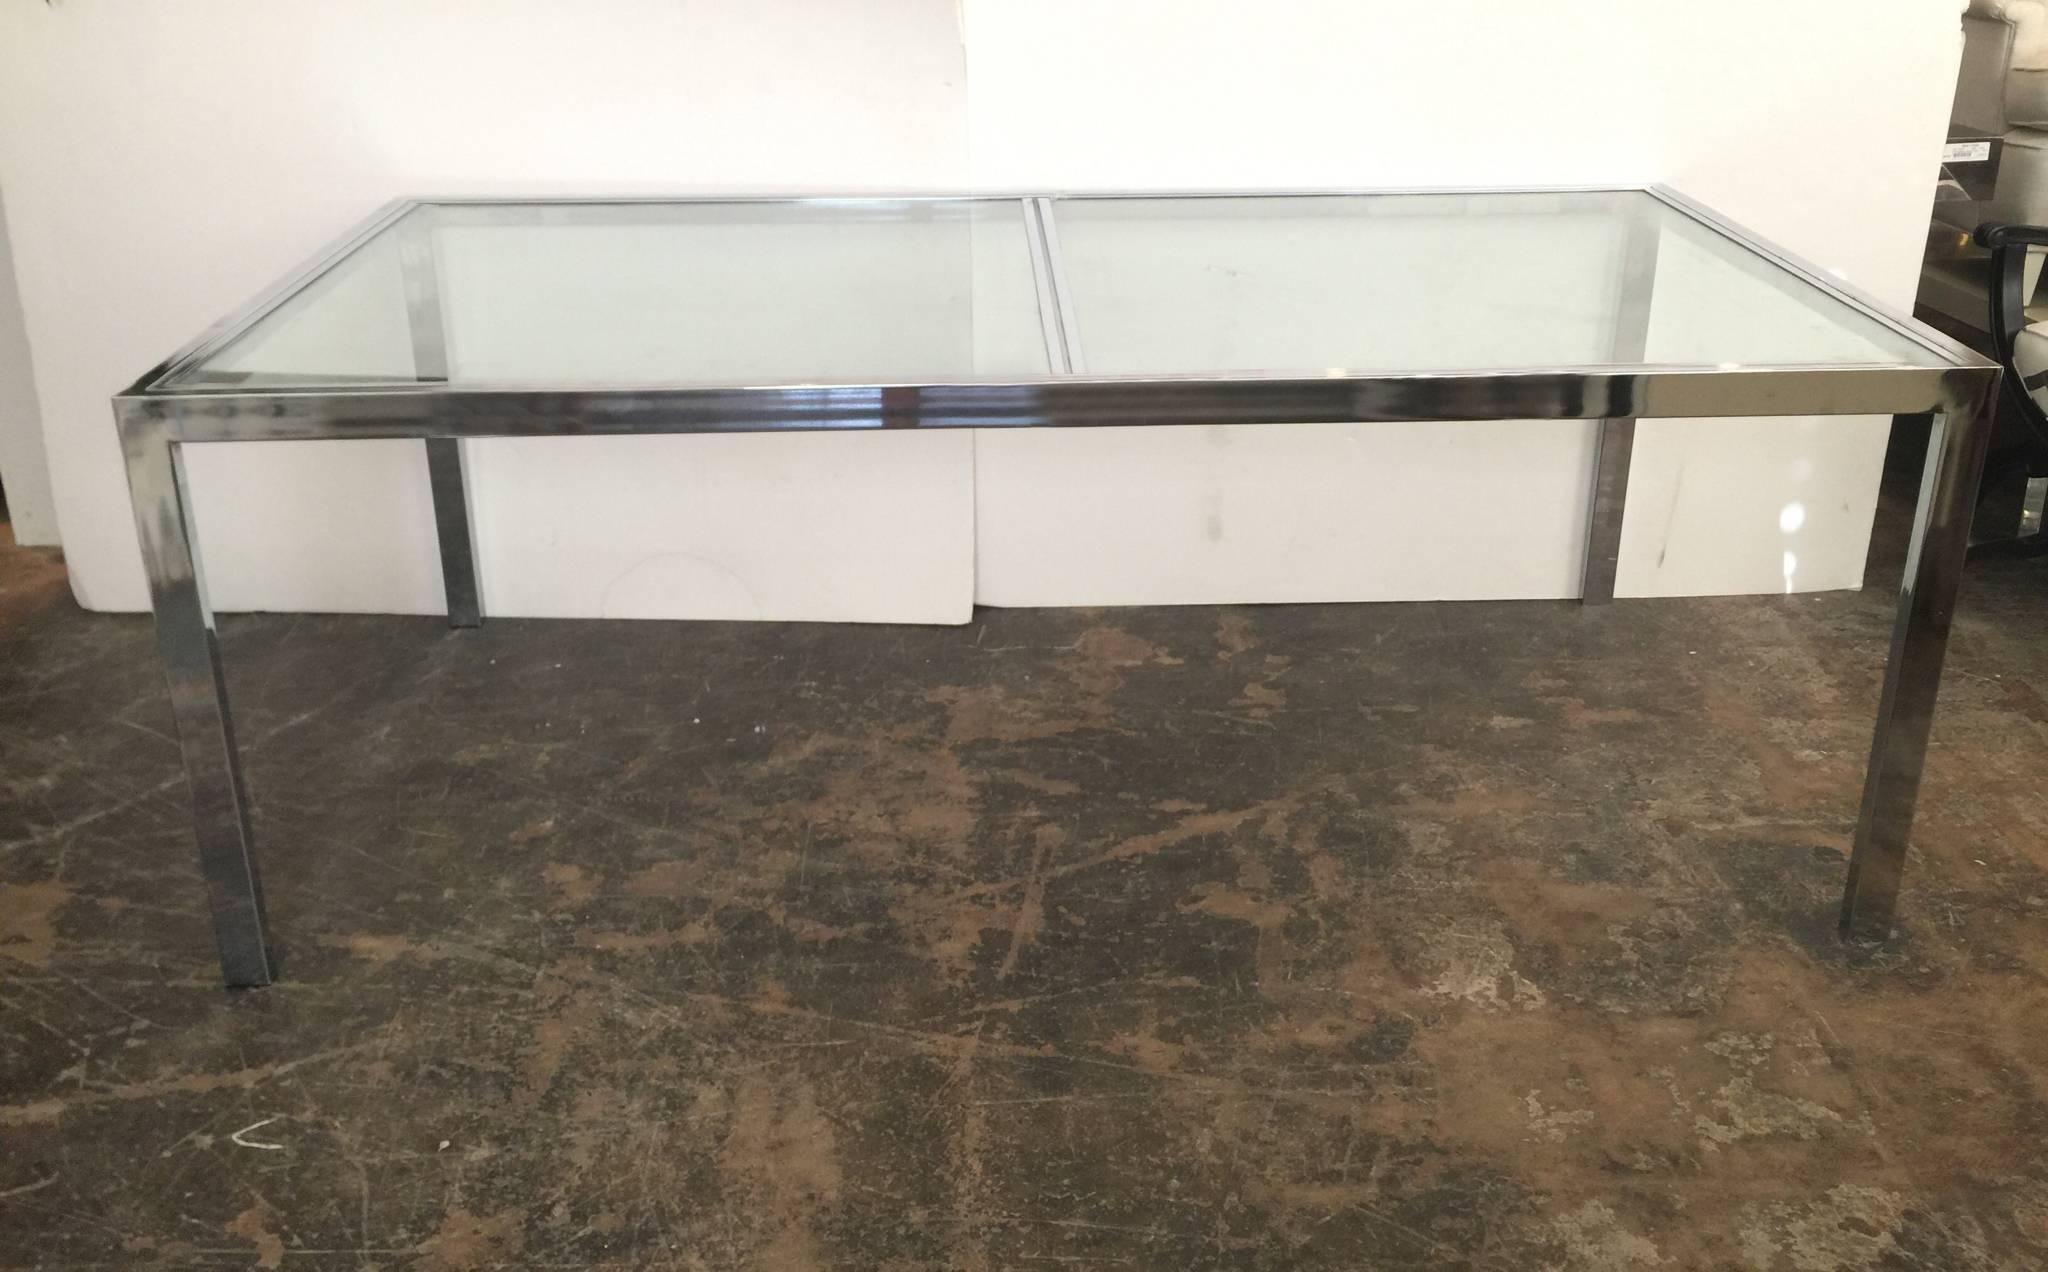 Chrome and glass parson dining table by DIA. The chrome and glass are in good vintage condition with minimal scratching.

Dimensions: 76